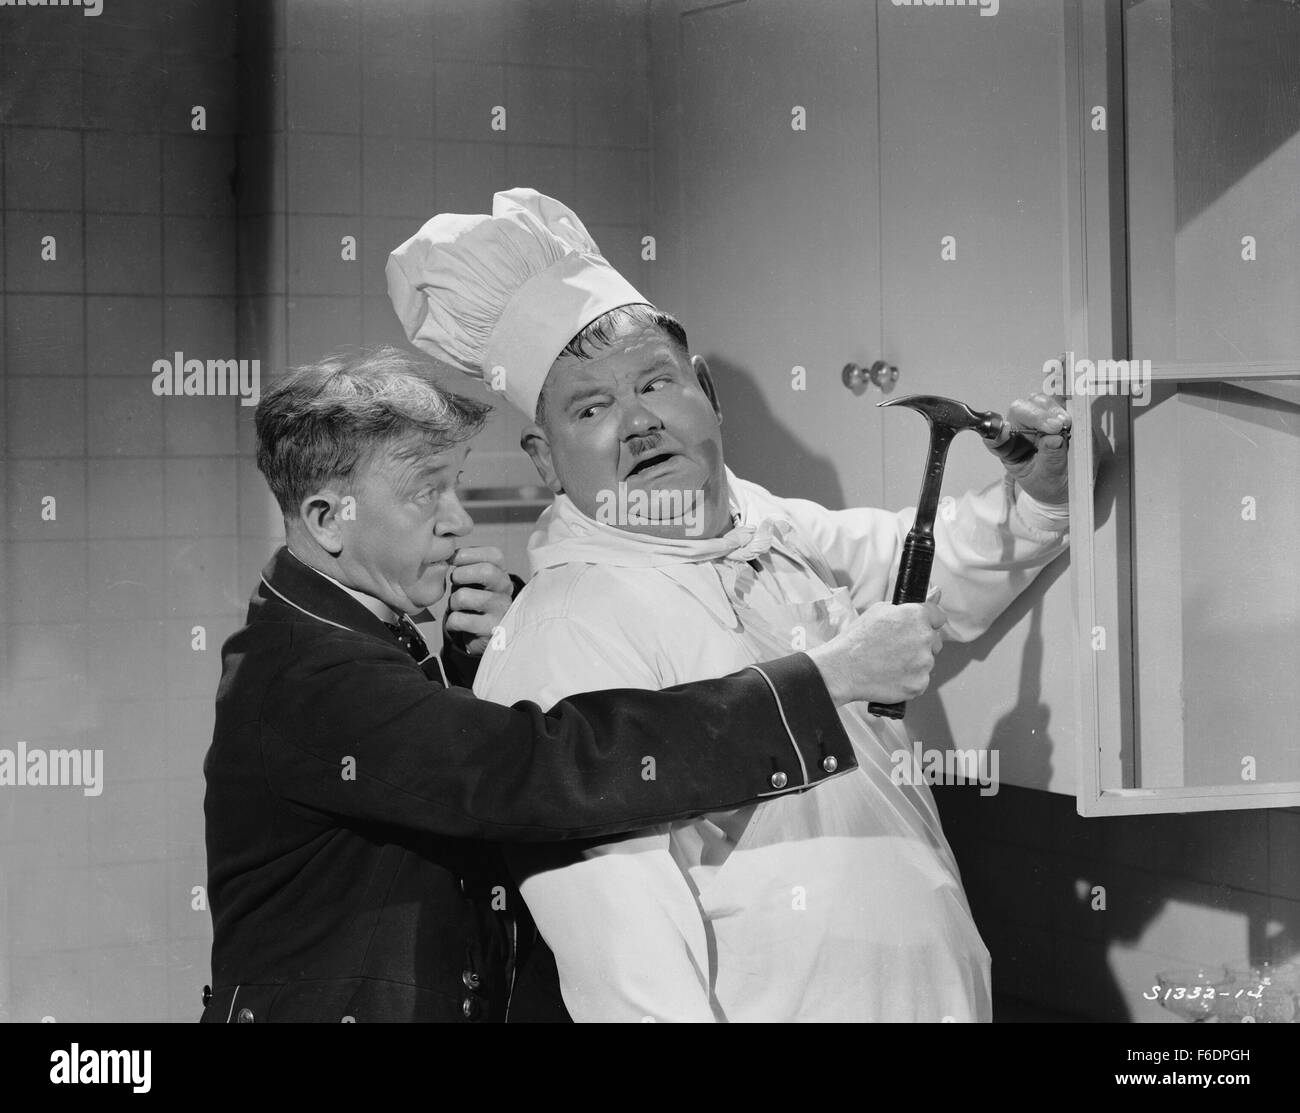 RELEASE DATE: December 6, 1944. MOVIE TITLE: Nothing But Trouble. STUDIO: Metro-Goldwyn-Mayer (MGM). PLOT: Working as chef and butler, the boys wreck a fancy dinner party and, in the process, accidently foil a plot, by enemy agents, to poison a young exiled king. PICTURED: STAN LAUREL as Stan and OLIVER HARDY as Ollie. Stock Photo